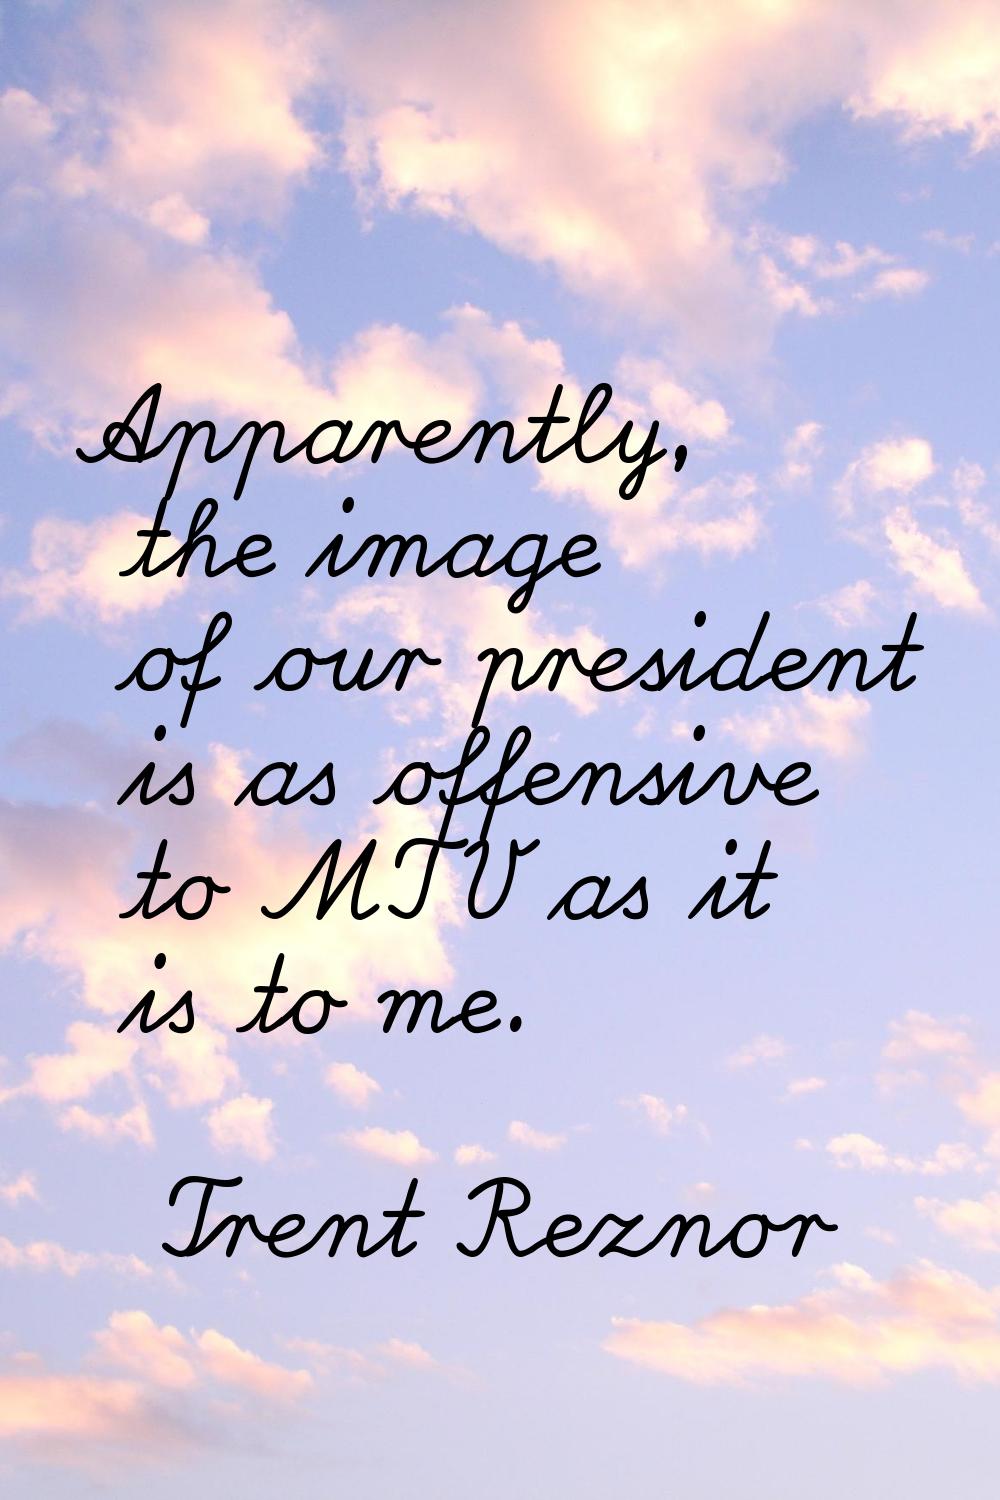 Apparently, the image of our president is as offensive to MTV as it is to me.